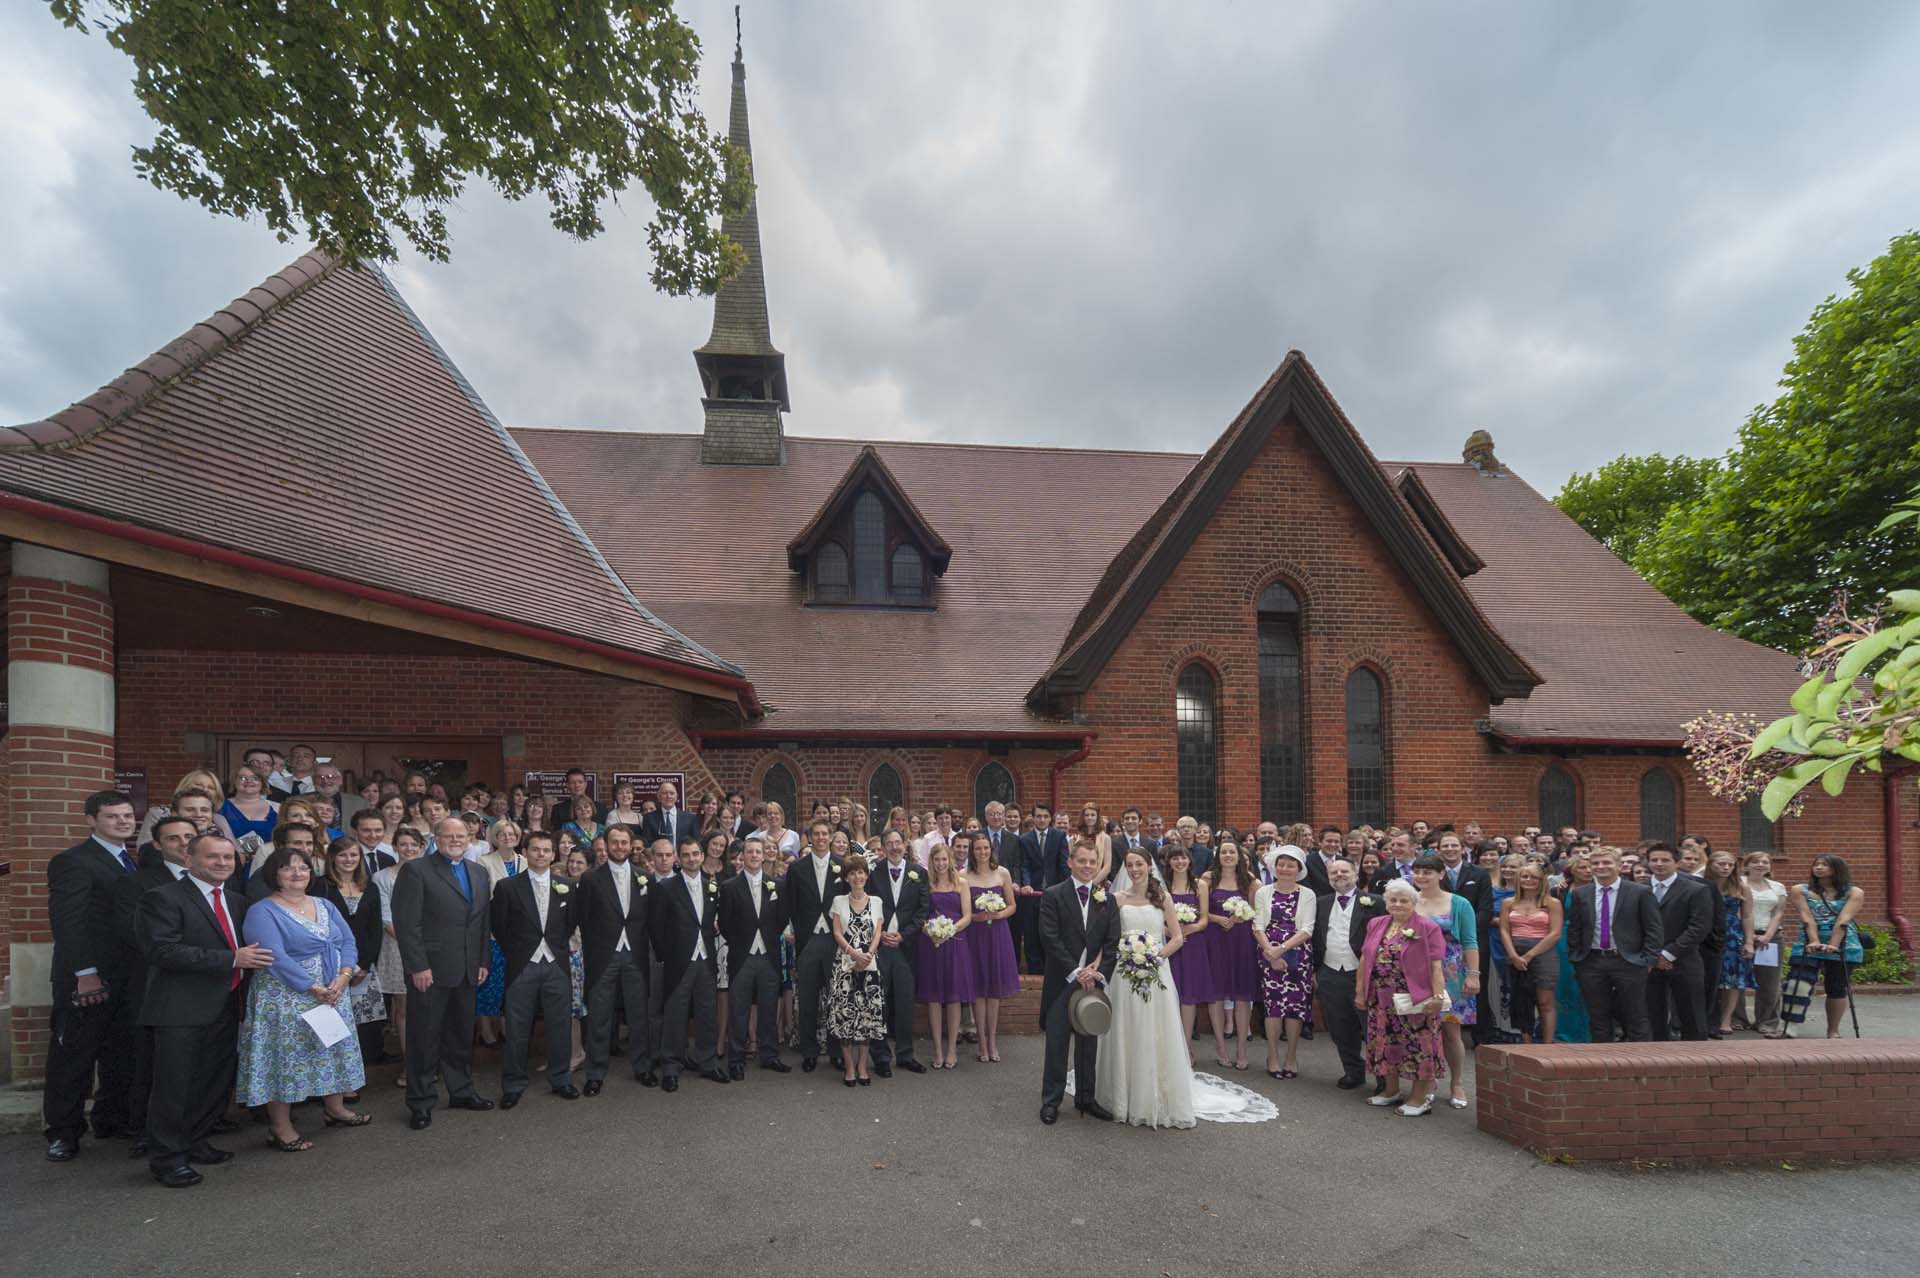 Ashtead Surrey Wedding photographer St georges church large wedding group article on extreme wide angle lenses